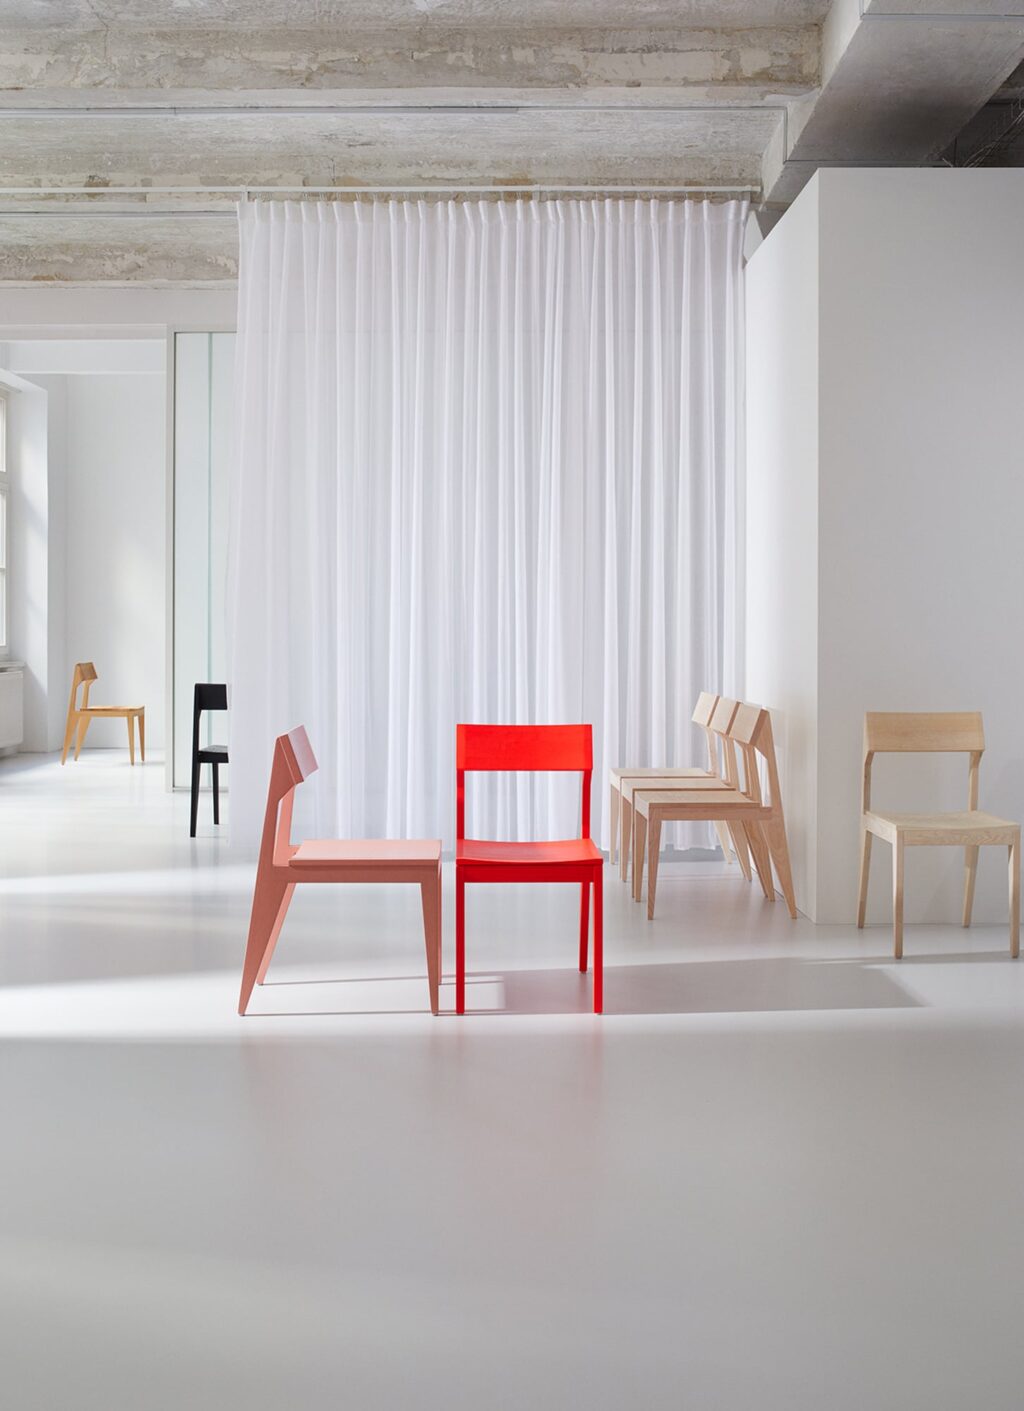 Objekte unserer Tage - OUT - Schulz - Chair - Solid ash - lacquered in various colours